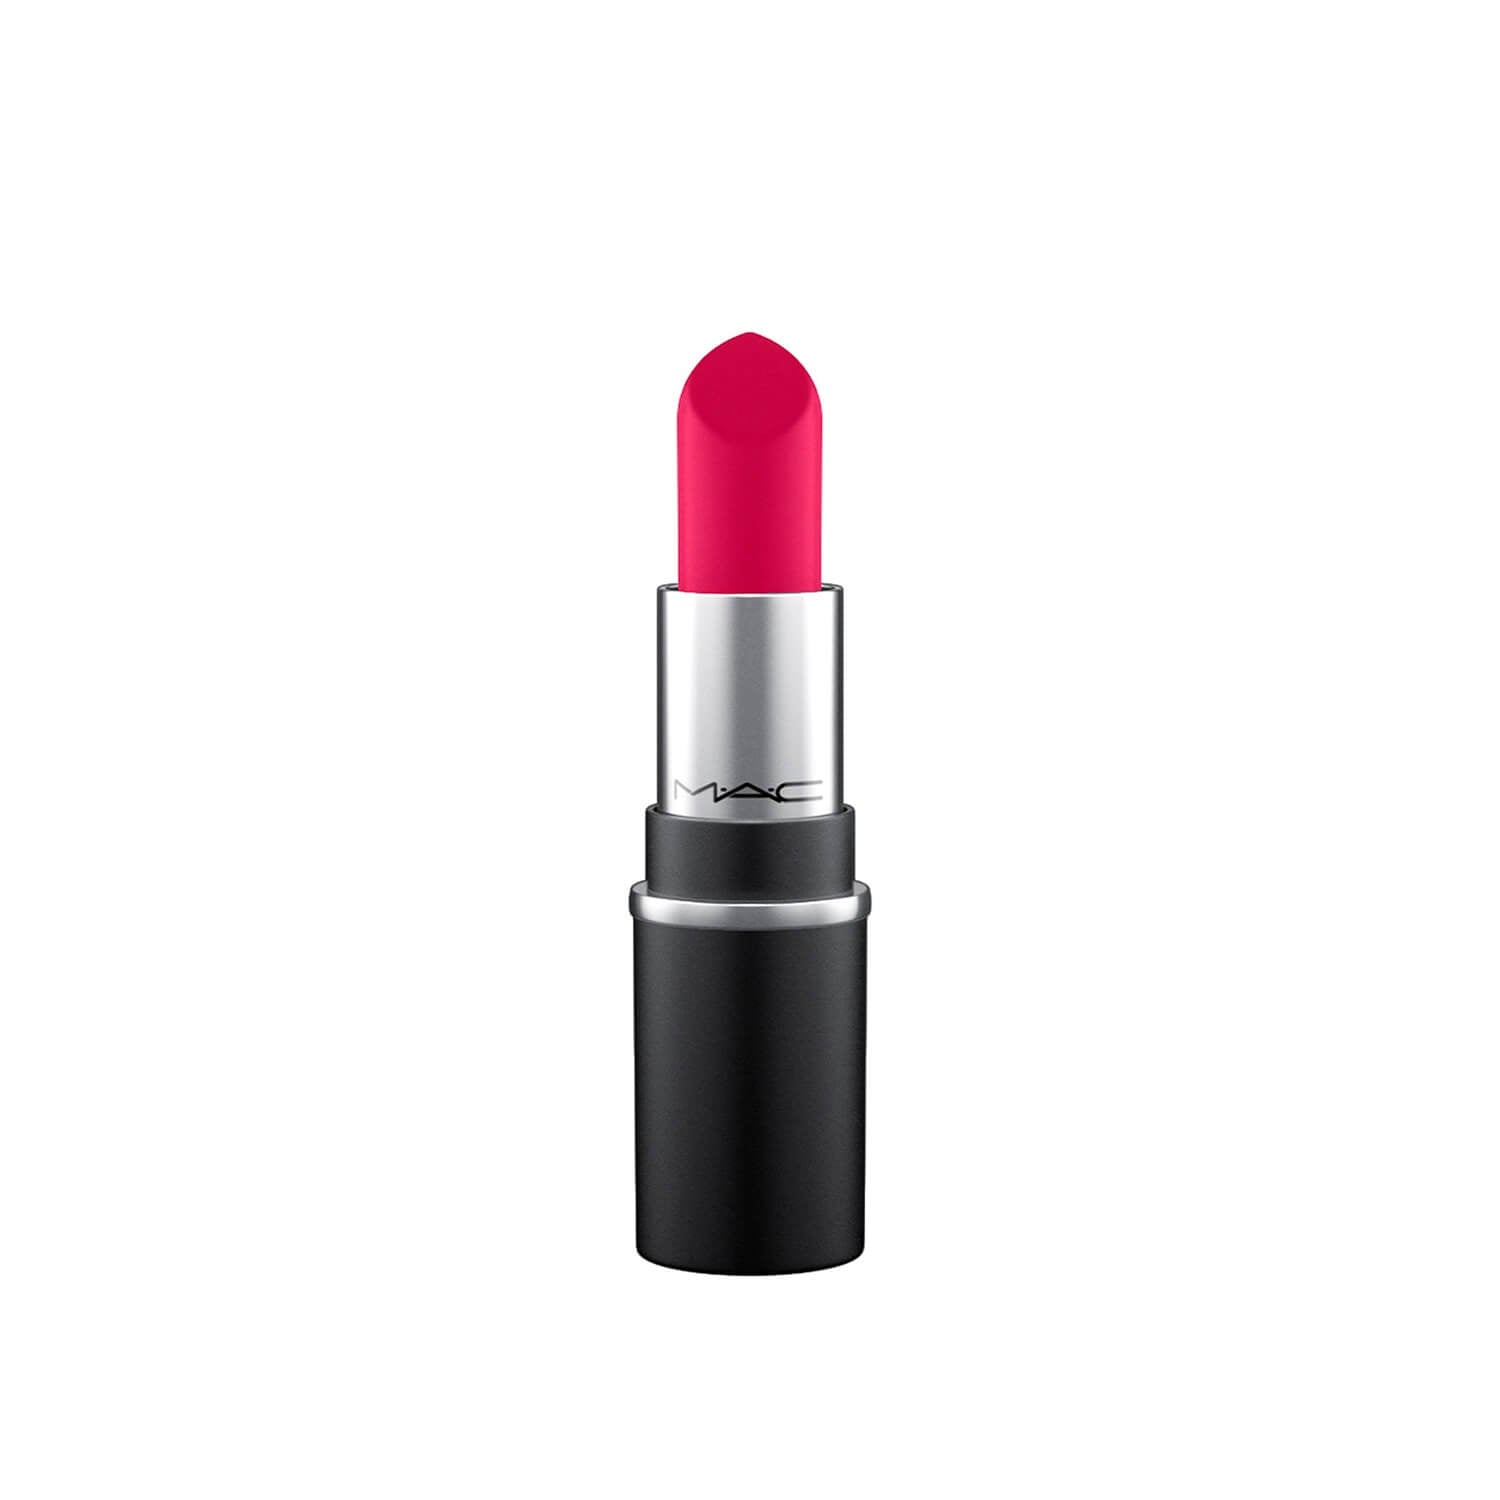 MAC Matte Mini Lipstick - All Fired Up available at Heygirl.pk for delivery in Karachi, Lahore, Islamabad across Pakistan